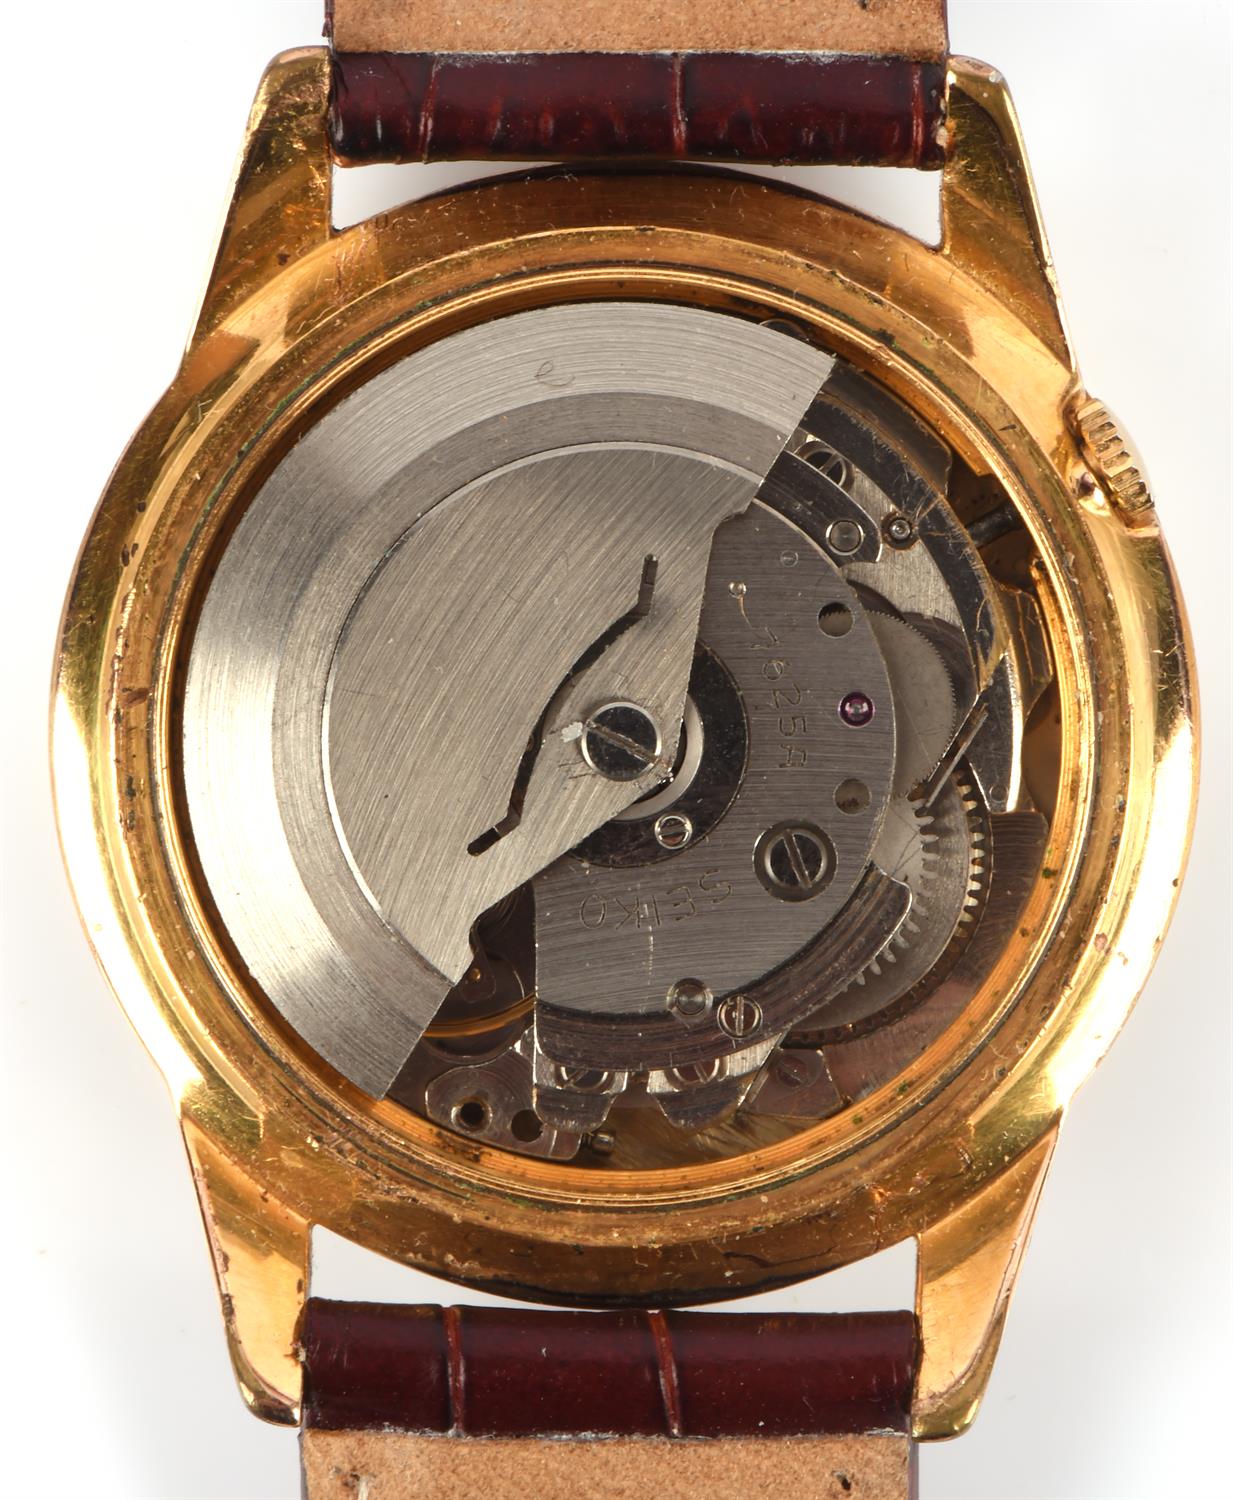 Seiko a Gentleman's diashock gold plated wristwatch the signed dial with baton hour markers and - Image 2 of 2